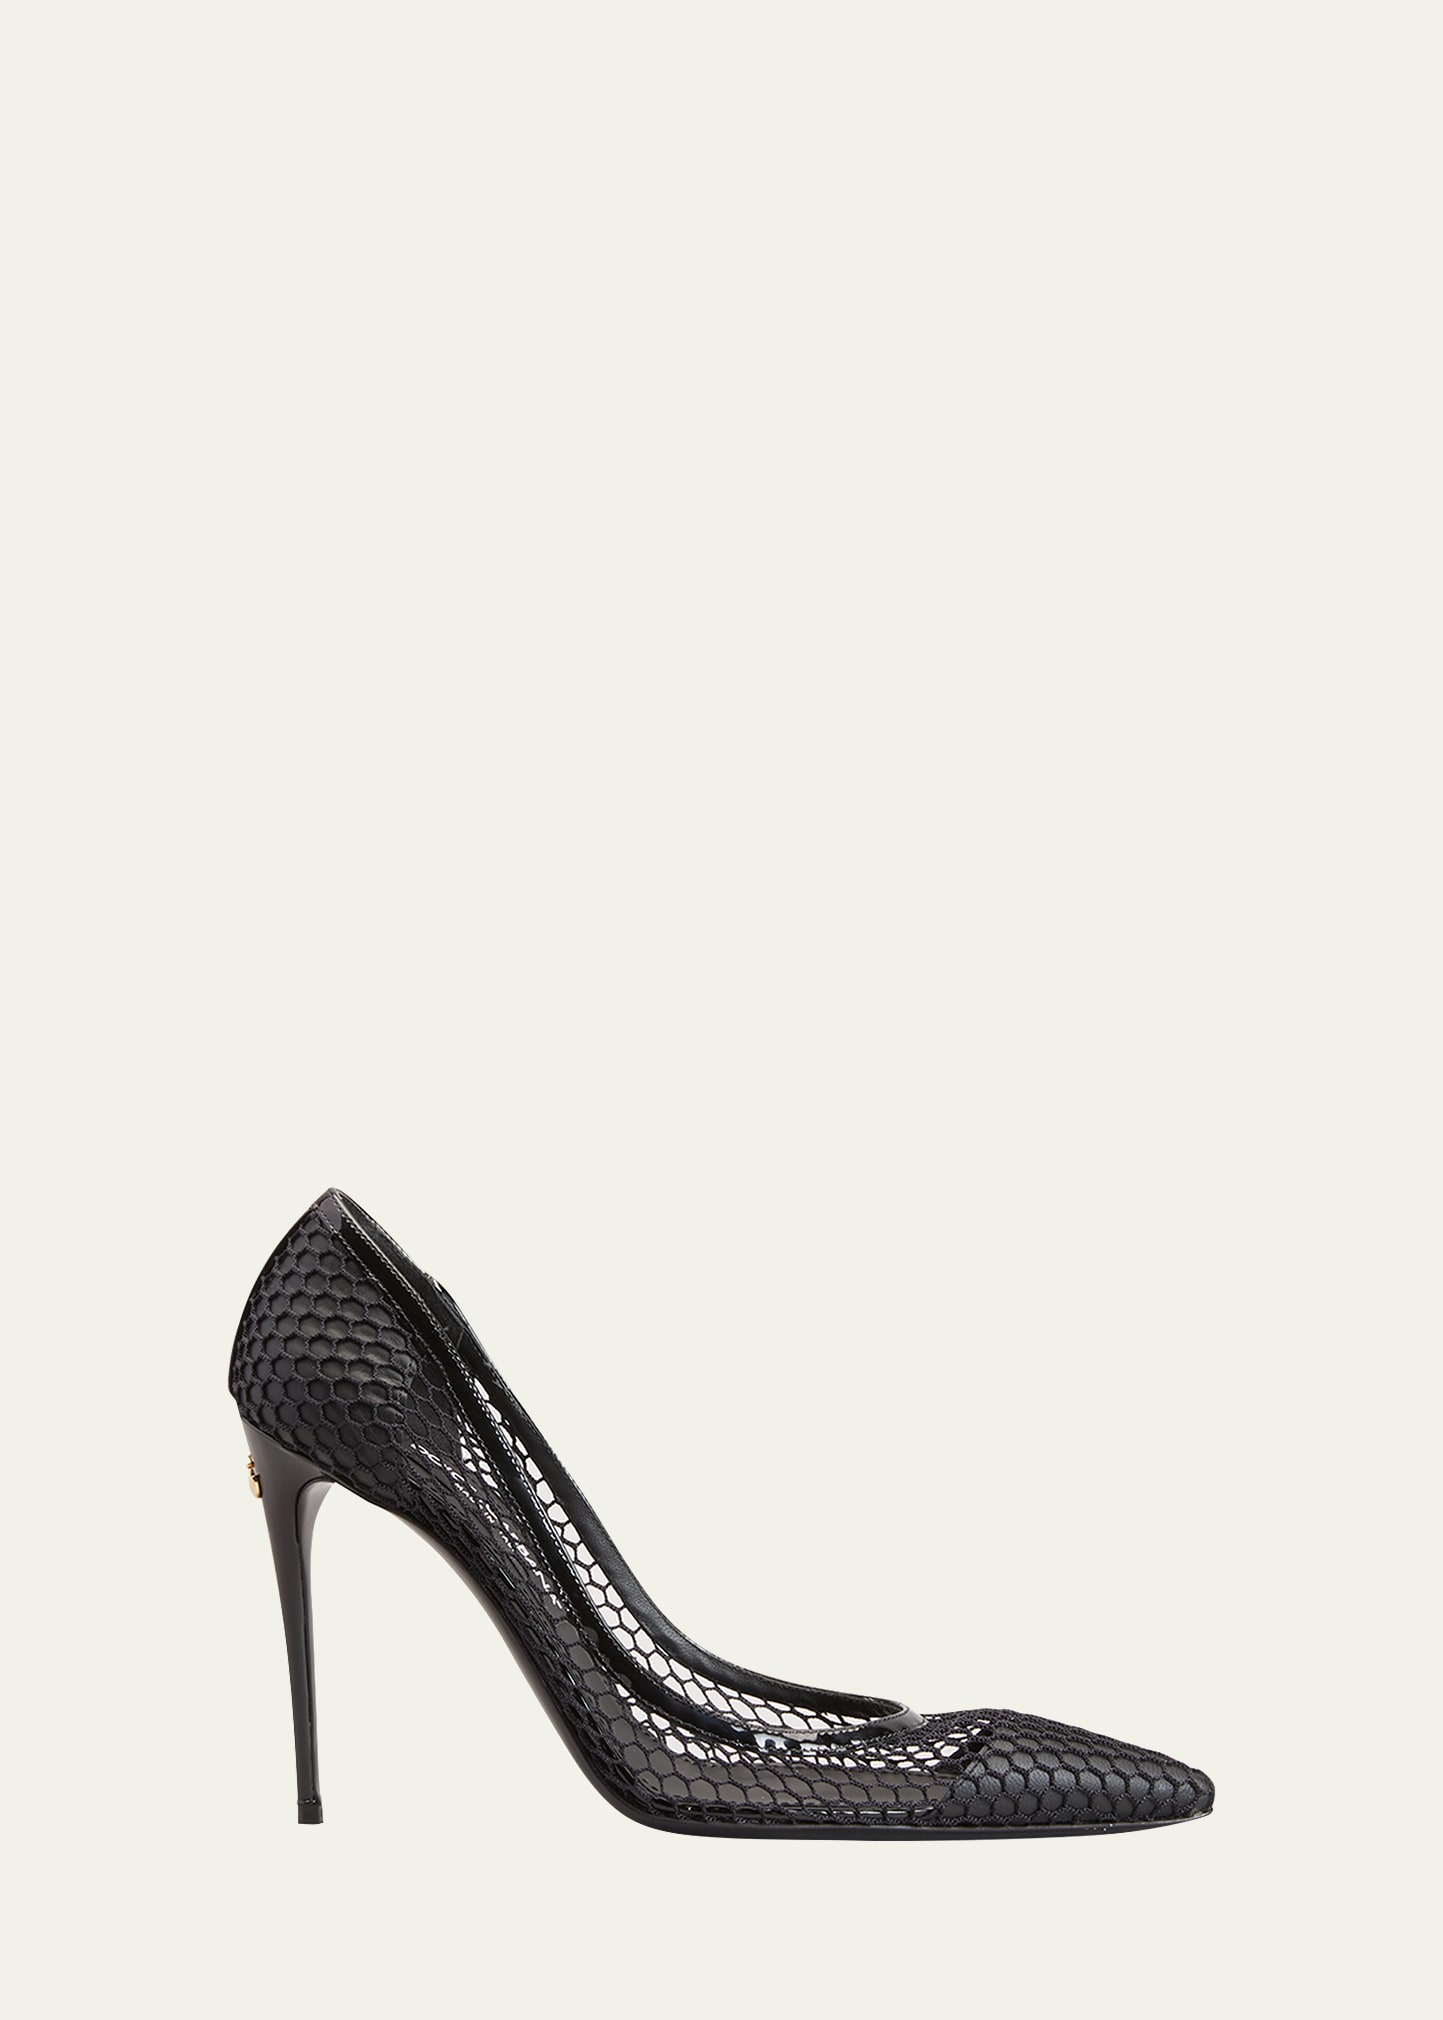 Vernice Netted Pumps